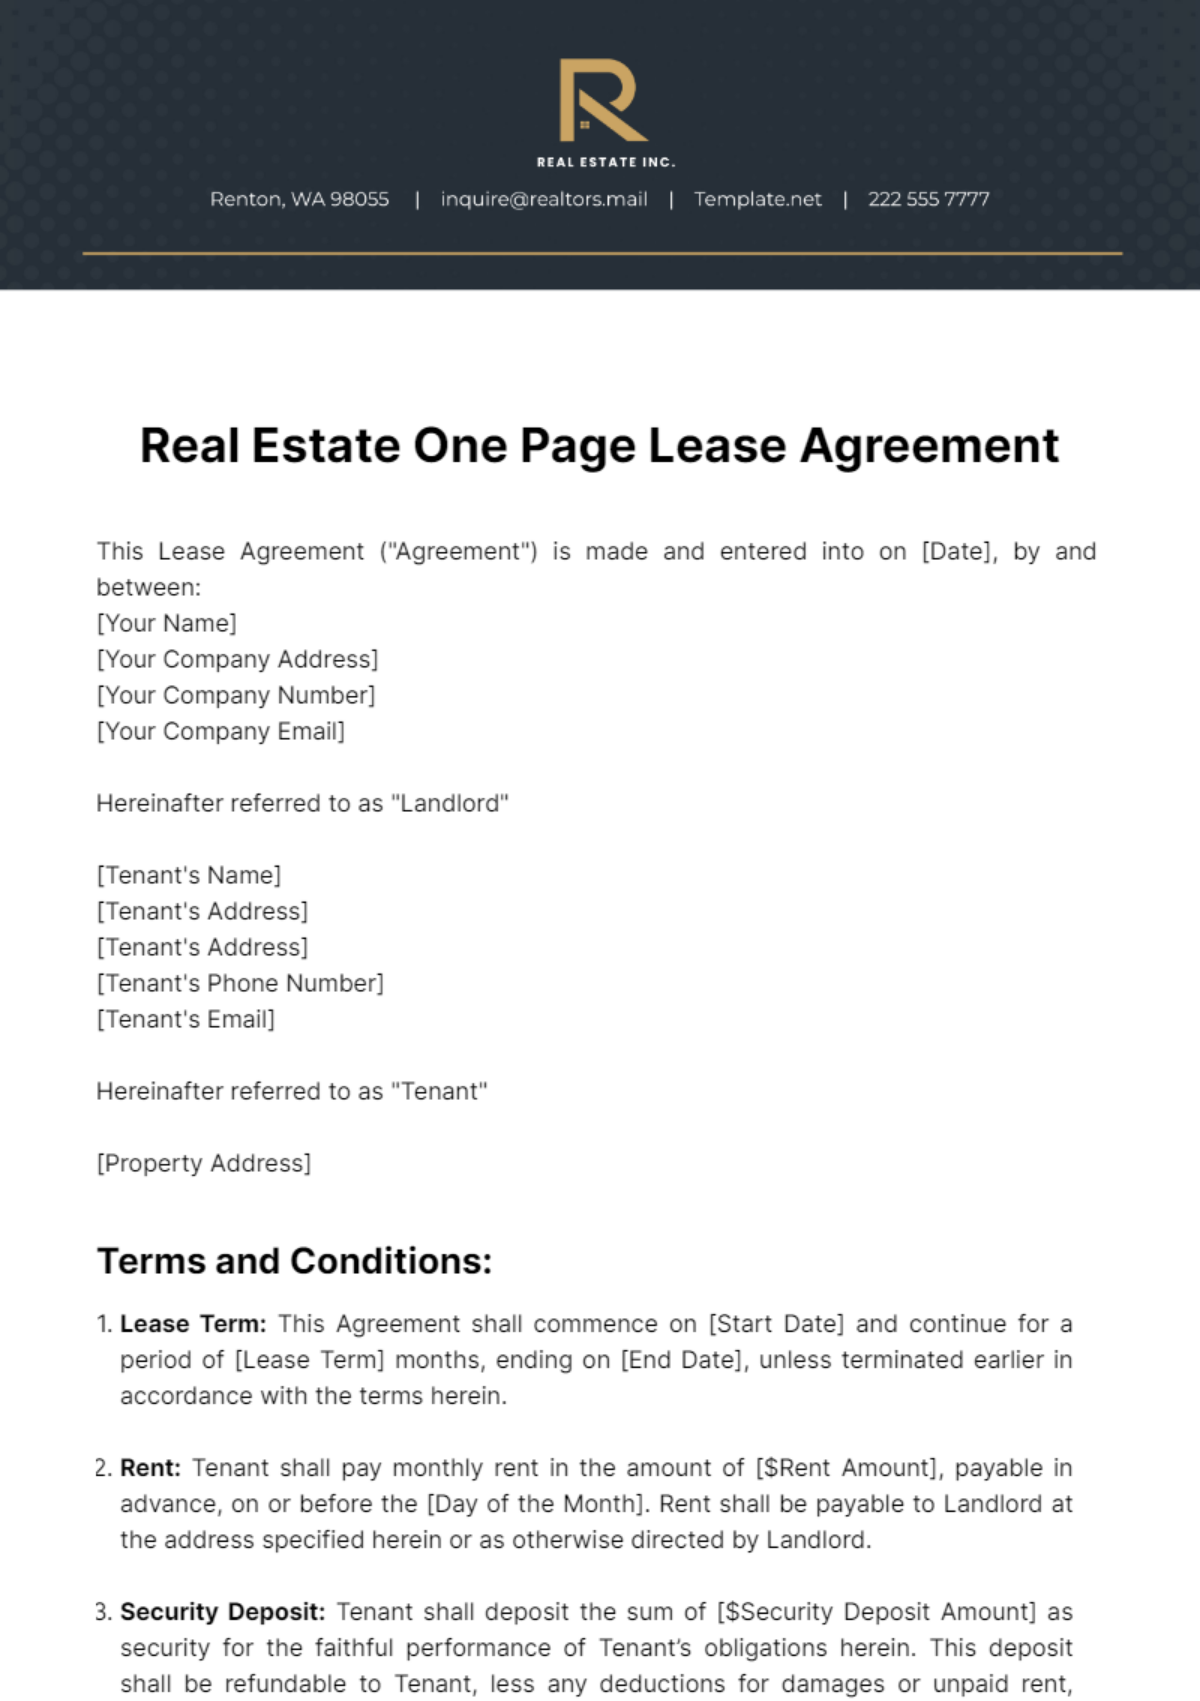 Real Estate One Page Lease Agreement Template